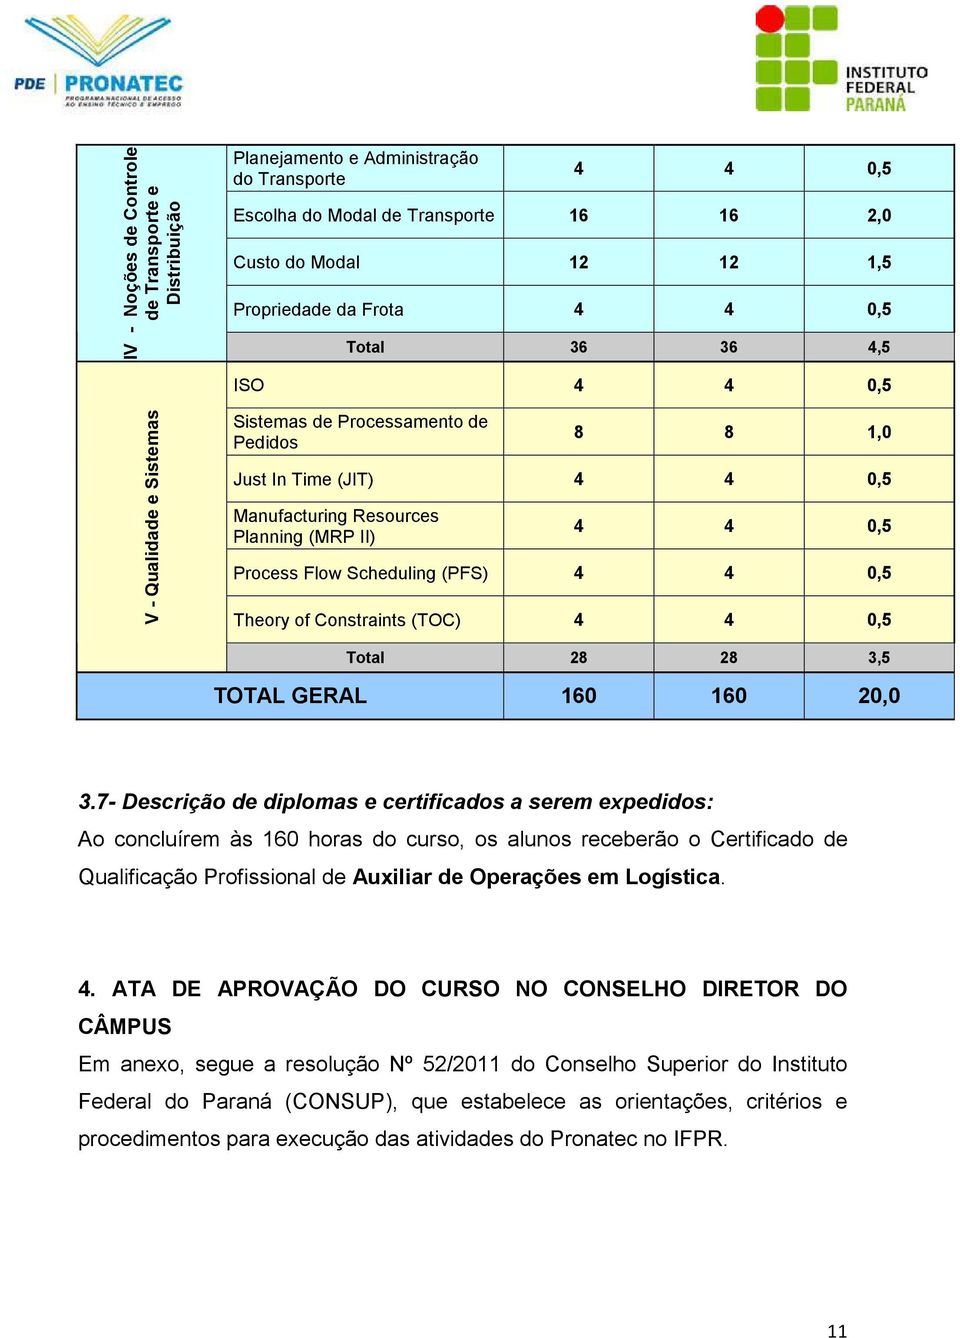 (PFS) 4 4 0,5 Theory of Constraints (TOC) 4 4 0,5 Total 28 28 3,5 TOTAL GERAL 160 160 20,0 3.